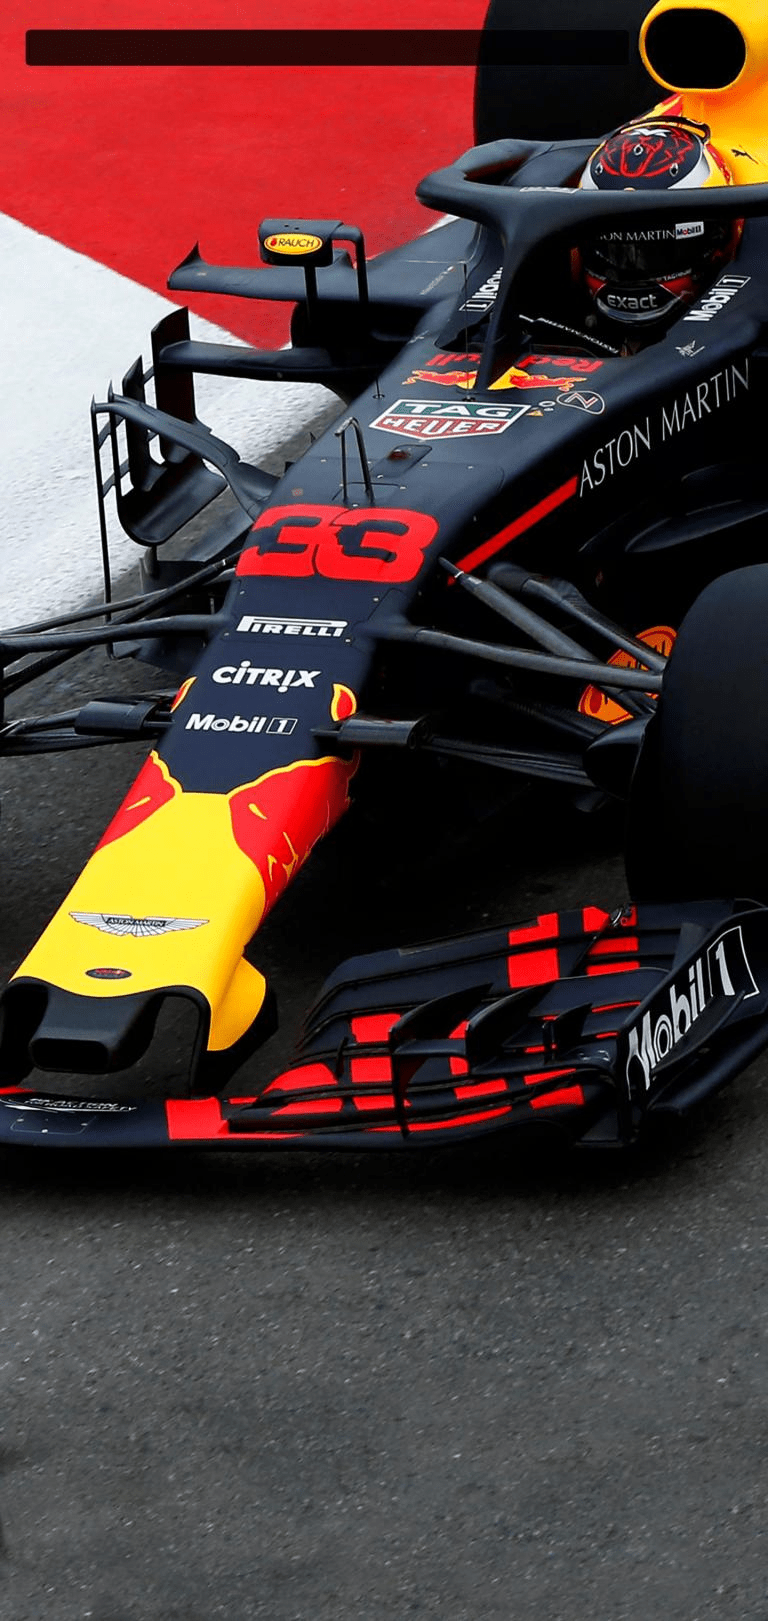 Red Bull F1 Iphone Wallpapers Top Free Red Bull F1 Iphone Backgrounds Wallpaperaccess